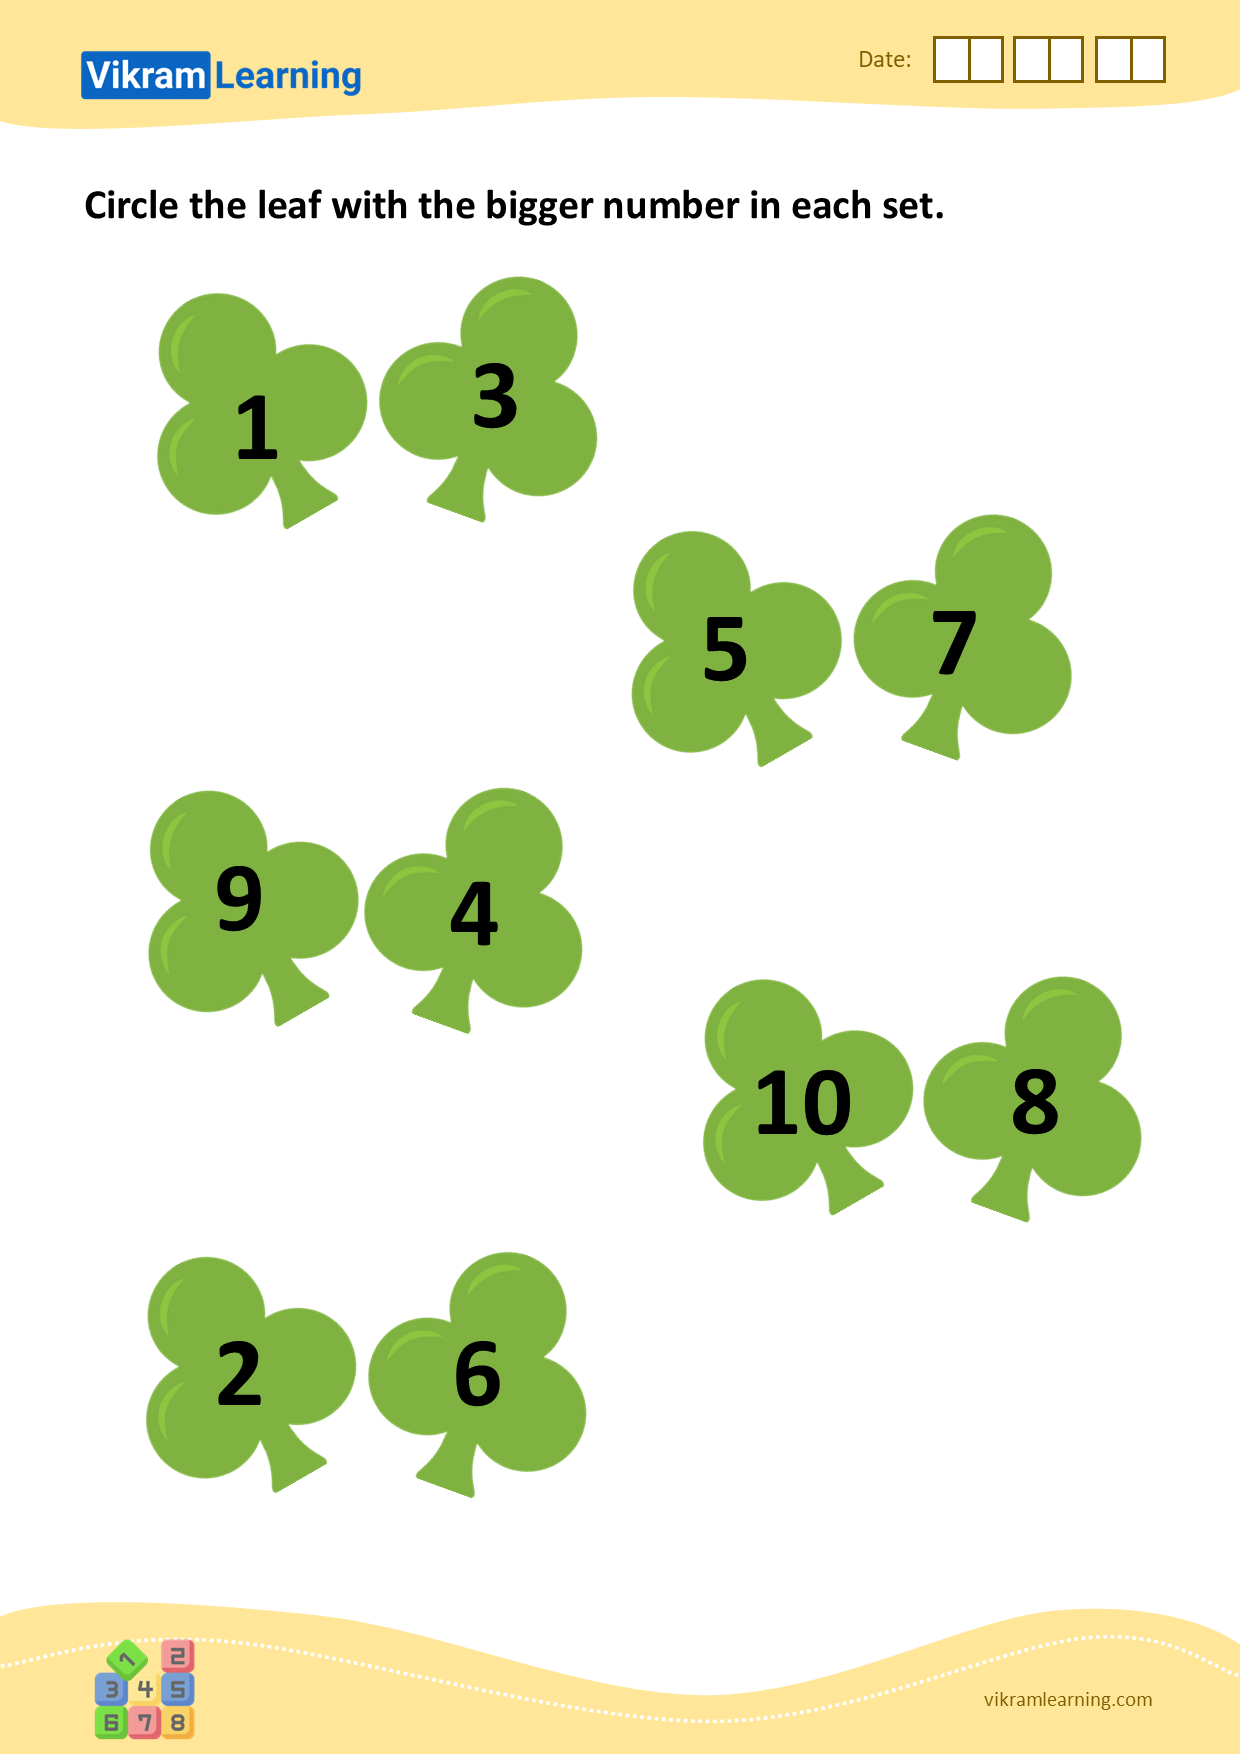 download-circle-the-leaf-with-the-bigger-number-in-each-set-worksheets-vikramlearning